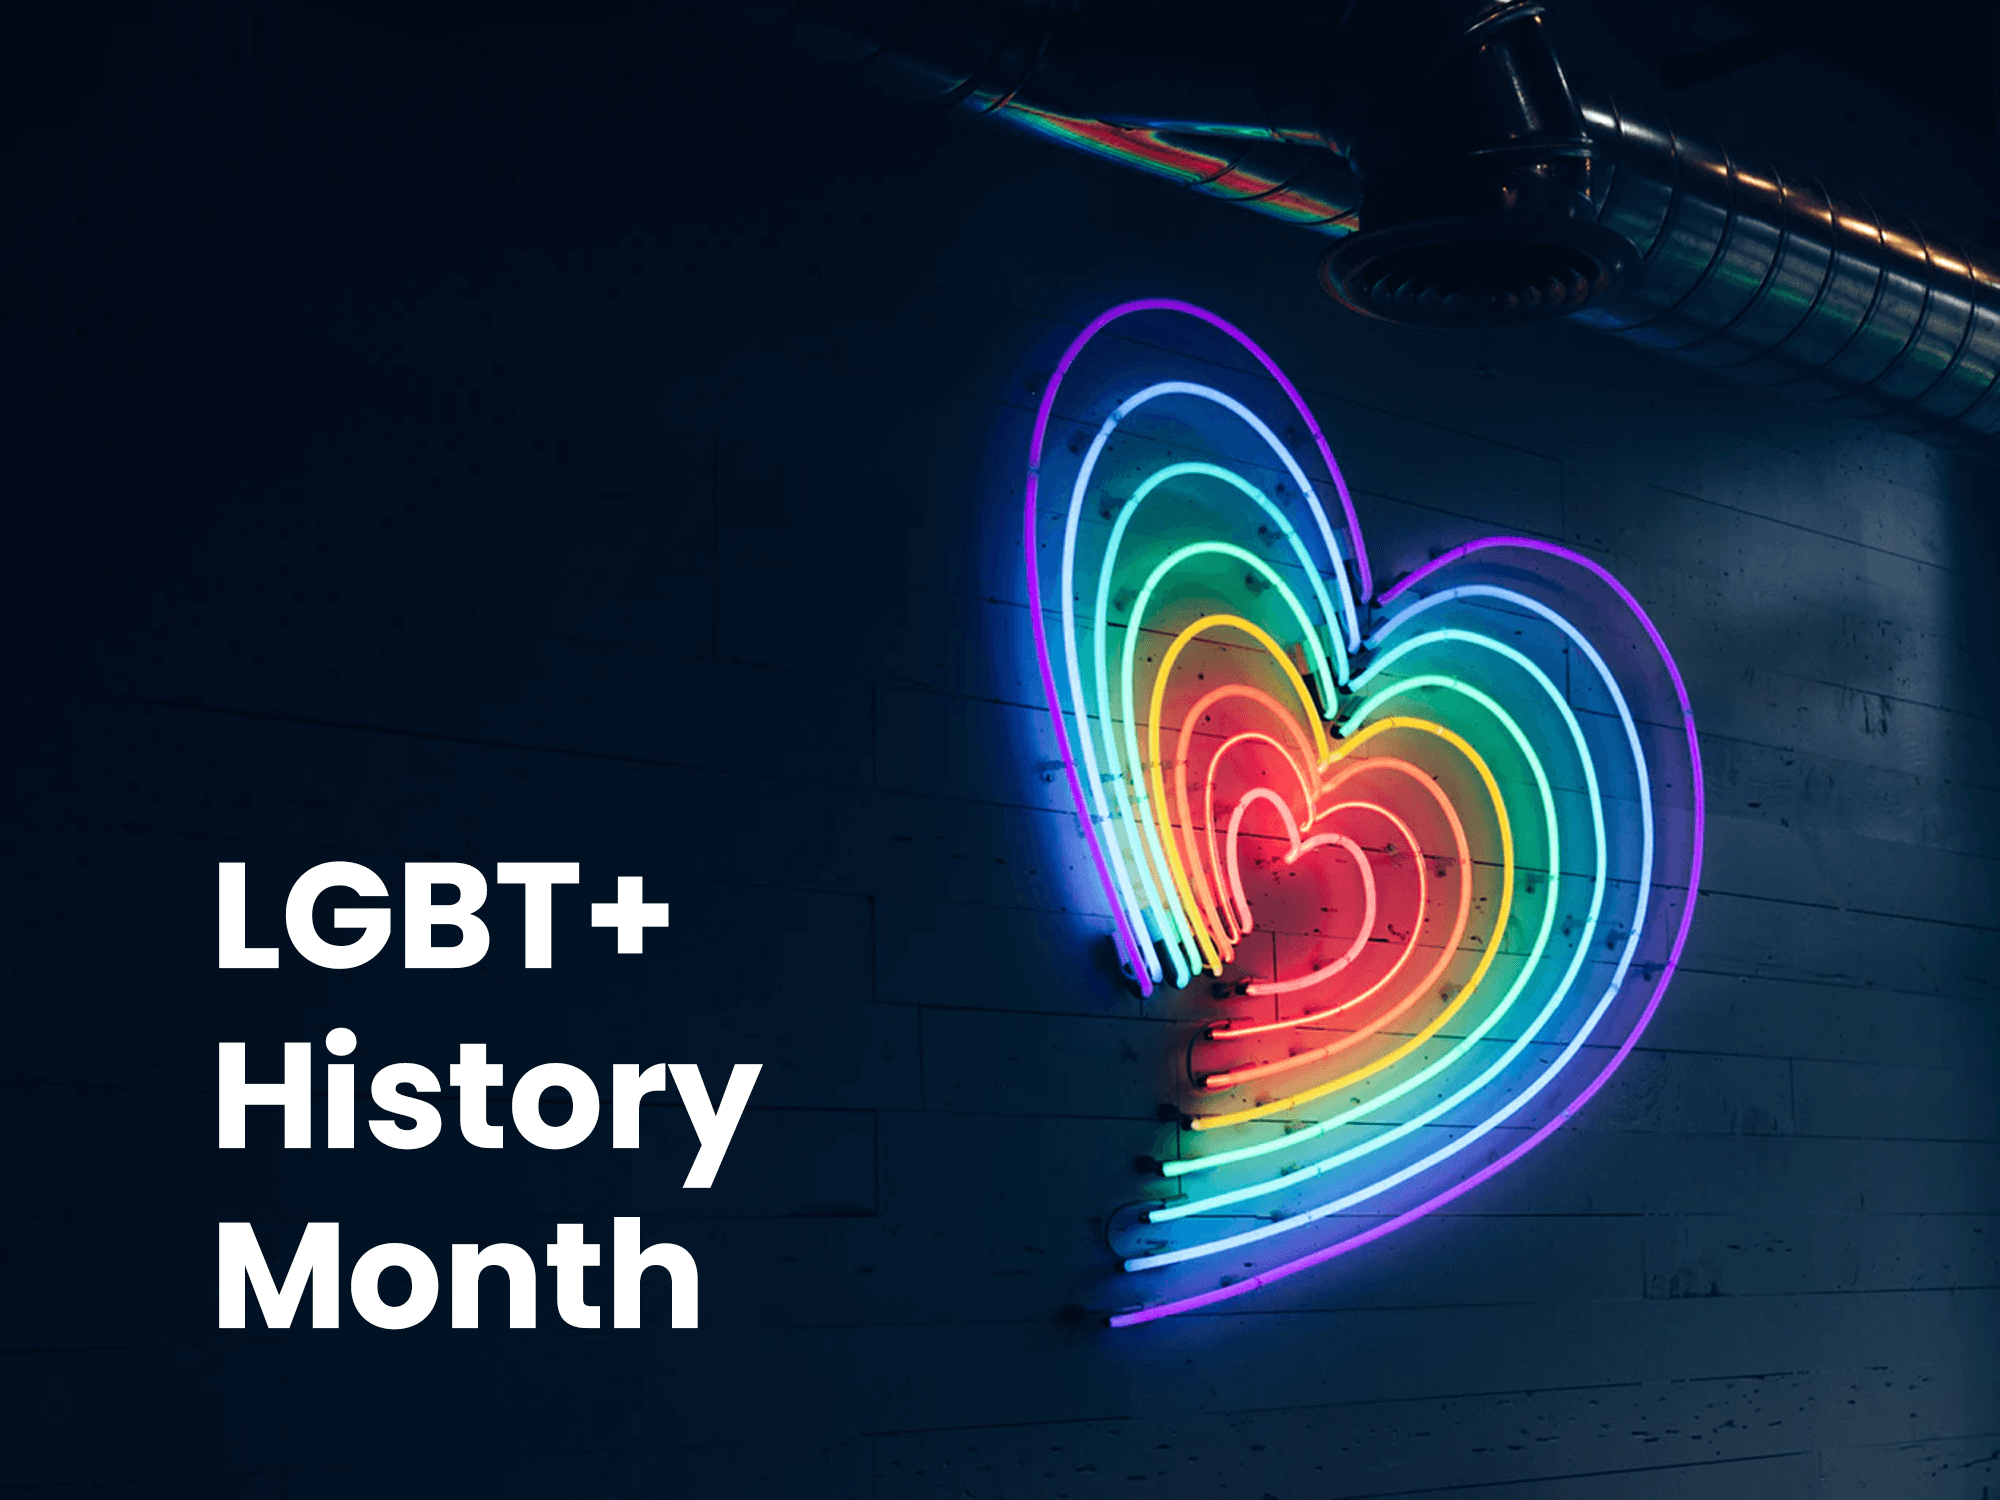 Montreal Careers - Why is LGBT History Month important?